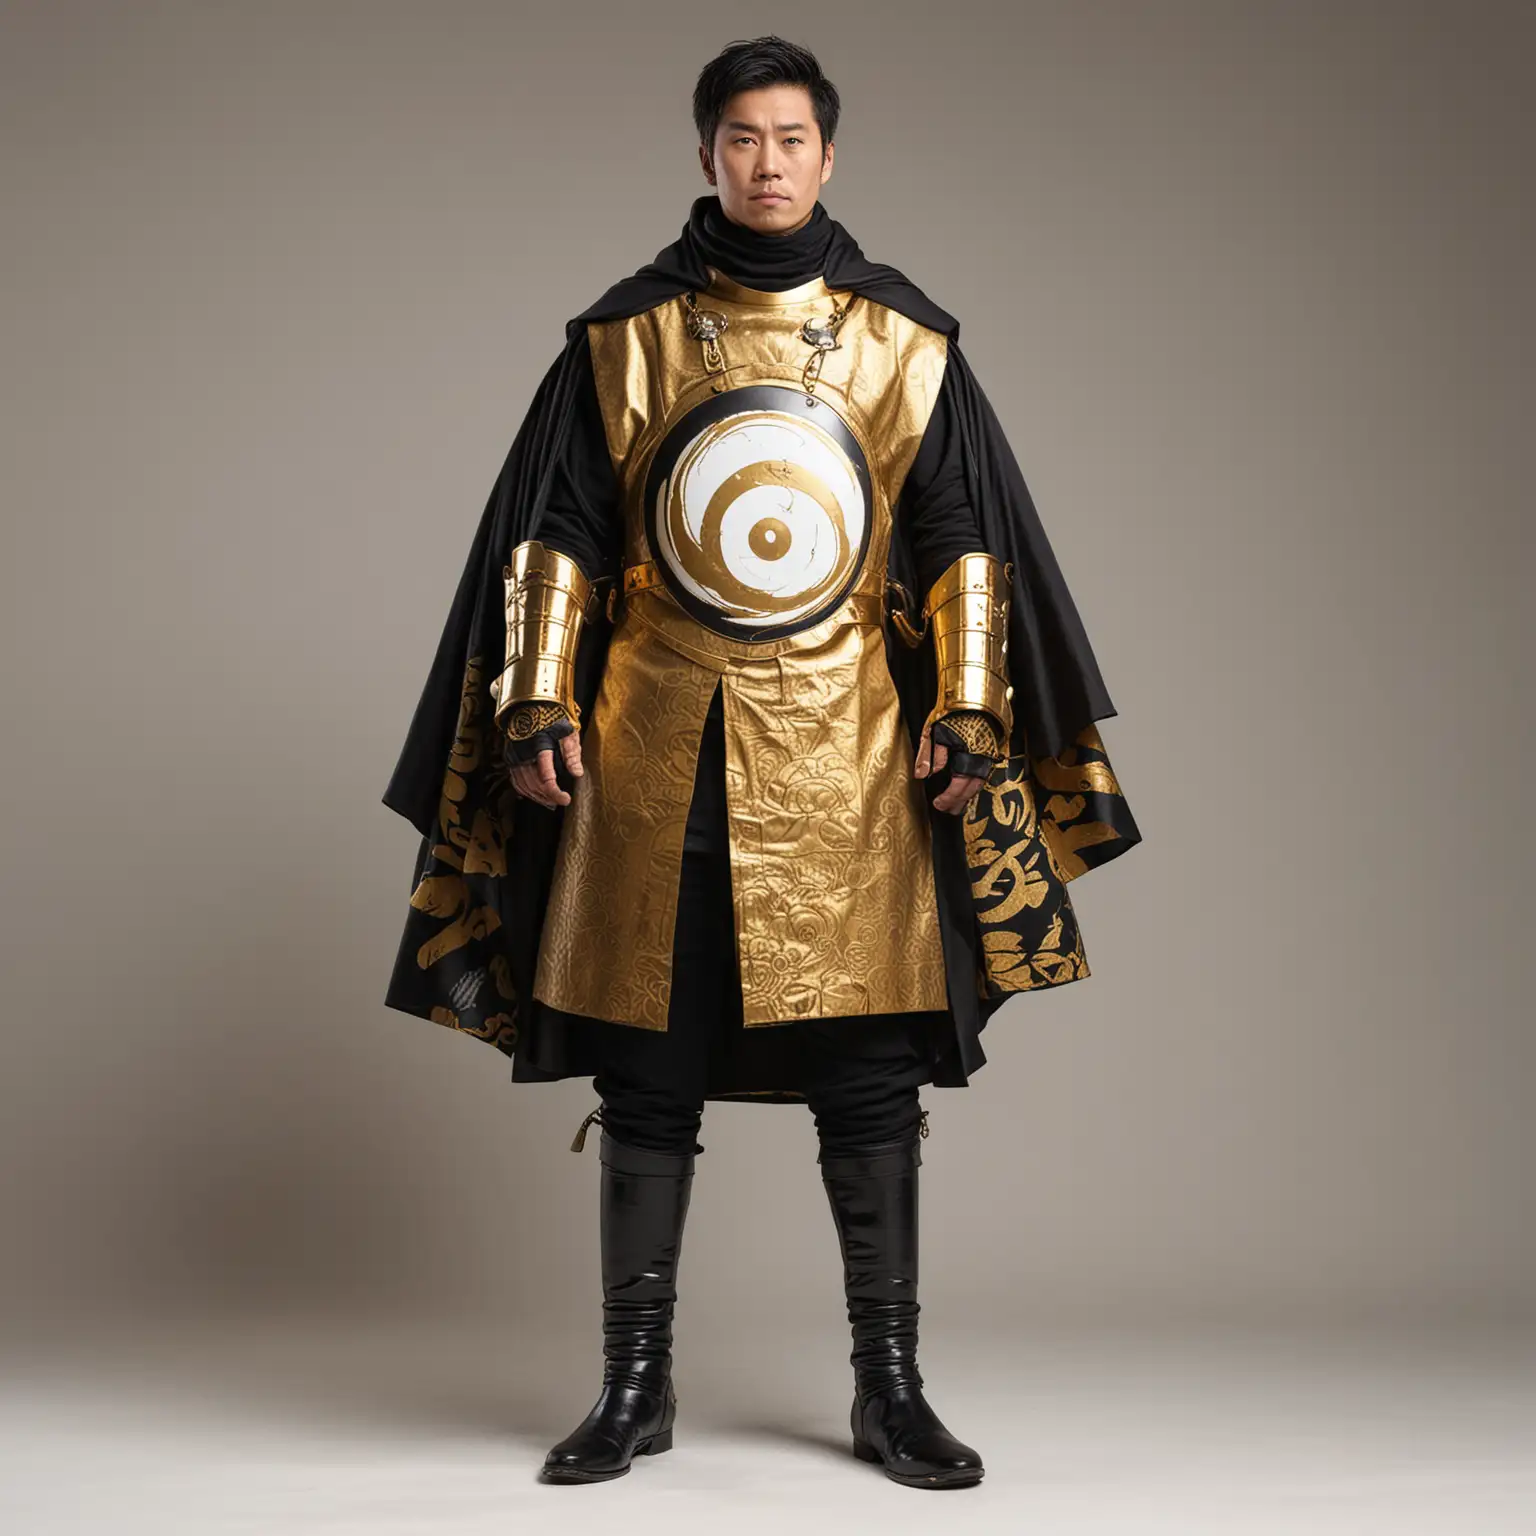 Standing full body view, looking to the right, Heroic Japanese man in black turtleneck, gold knight samurai, giant yin-yang symbol belt, gold cape, gold boots, boots, white background